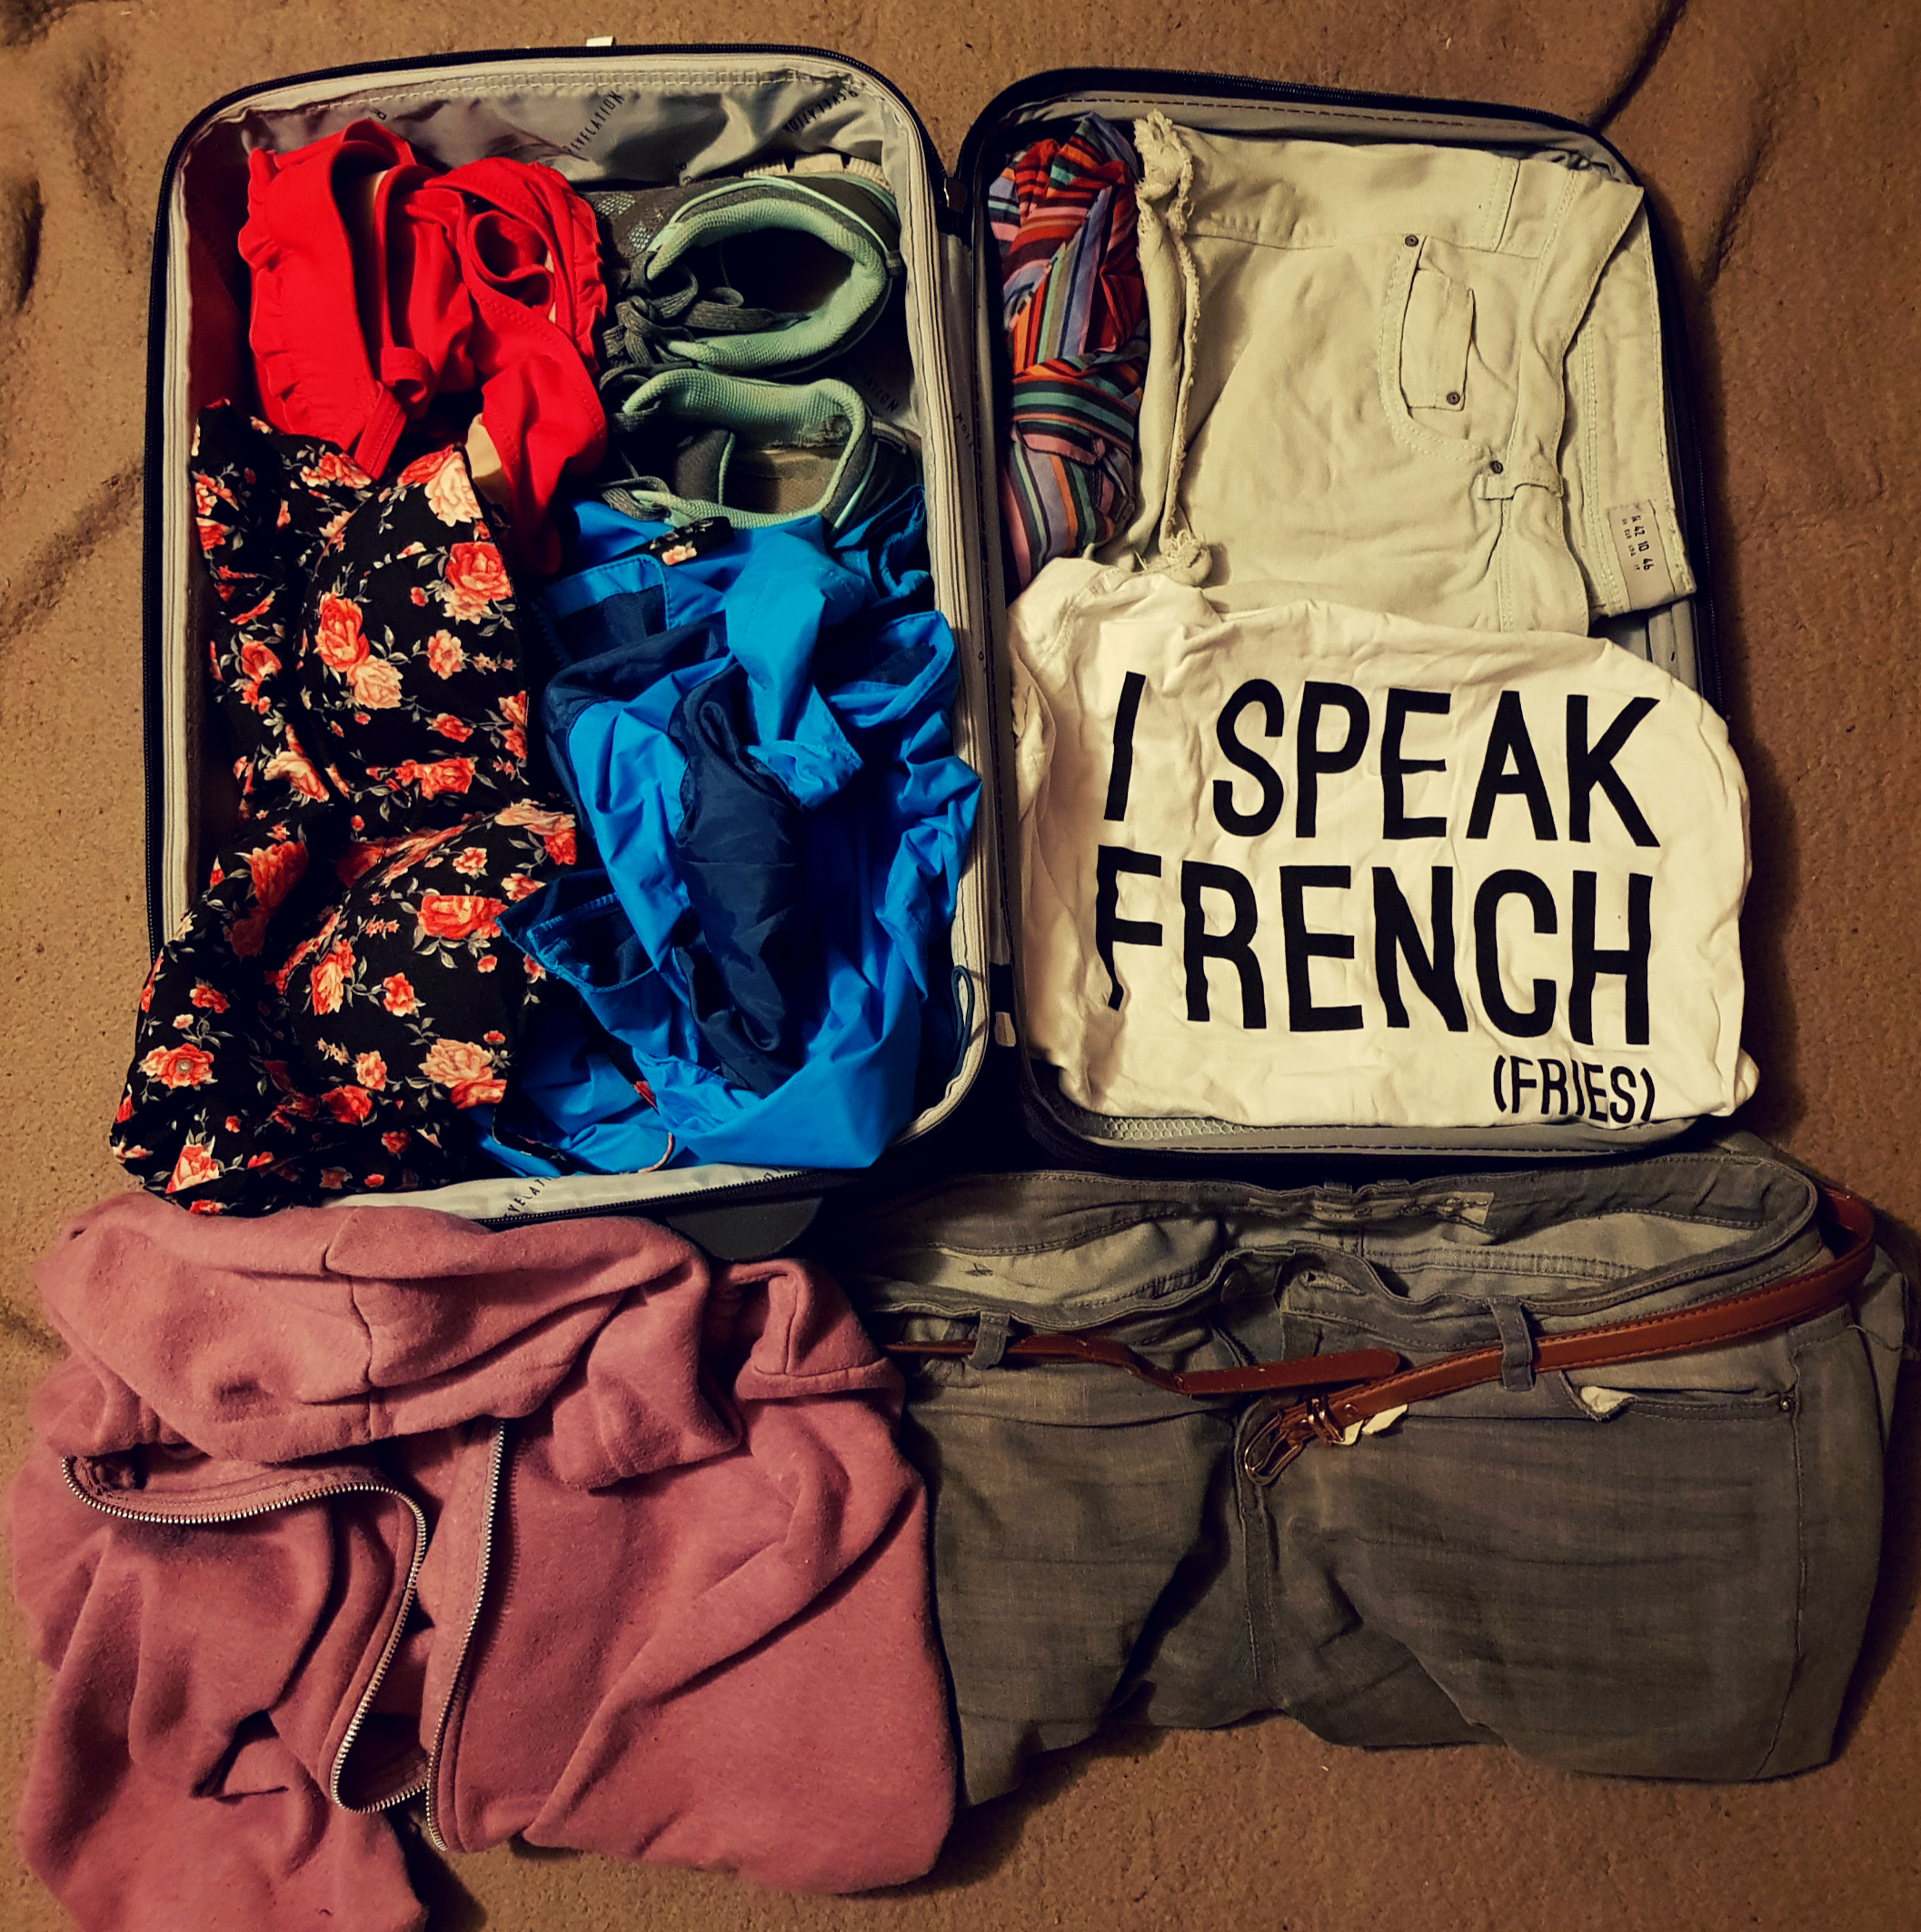 a purple suitcase filled with everything you need for your carry on bag packing in Paris France. a red bikini, blue and grey trainer, red and black flowery dress, blue raincoat, purple hoodie, grey jeans with a brown belt, blue shorts, a white top with black writing saying I SPEAK FRENCH (FRIES) and a multicoloured umbrella